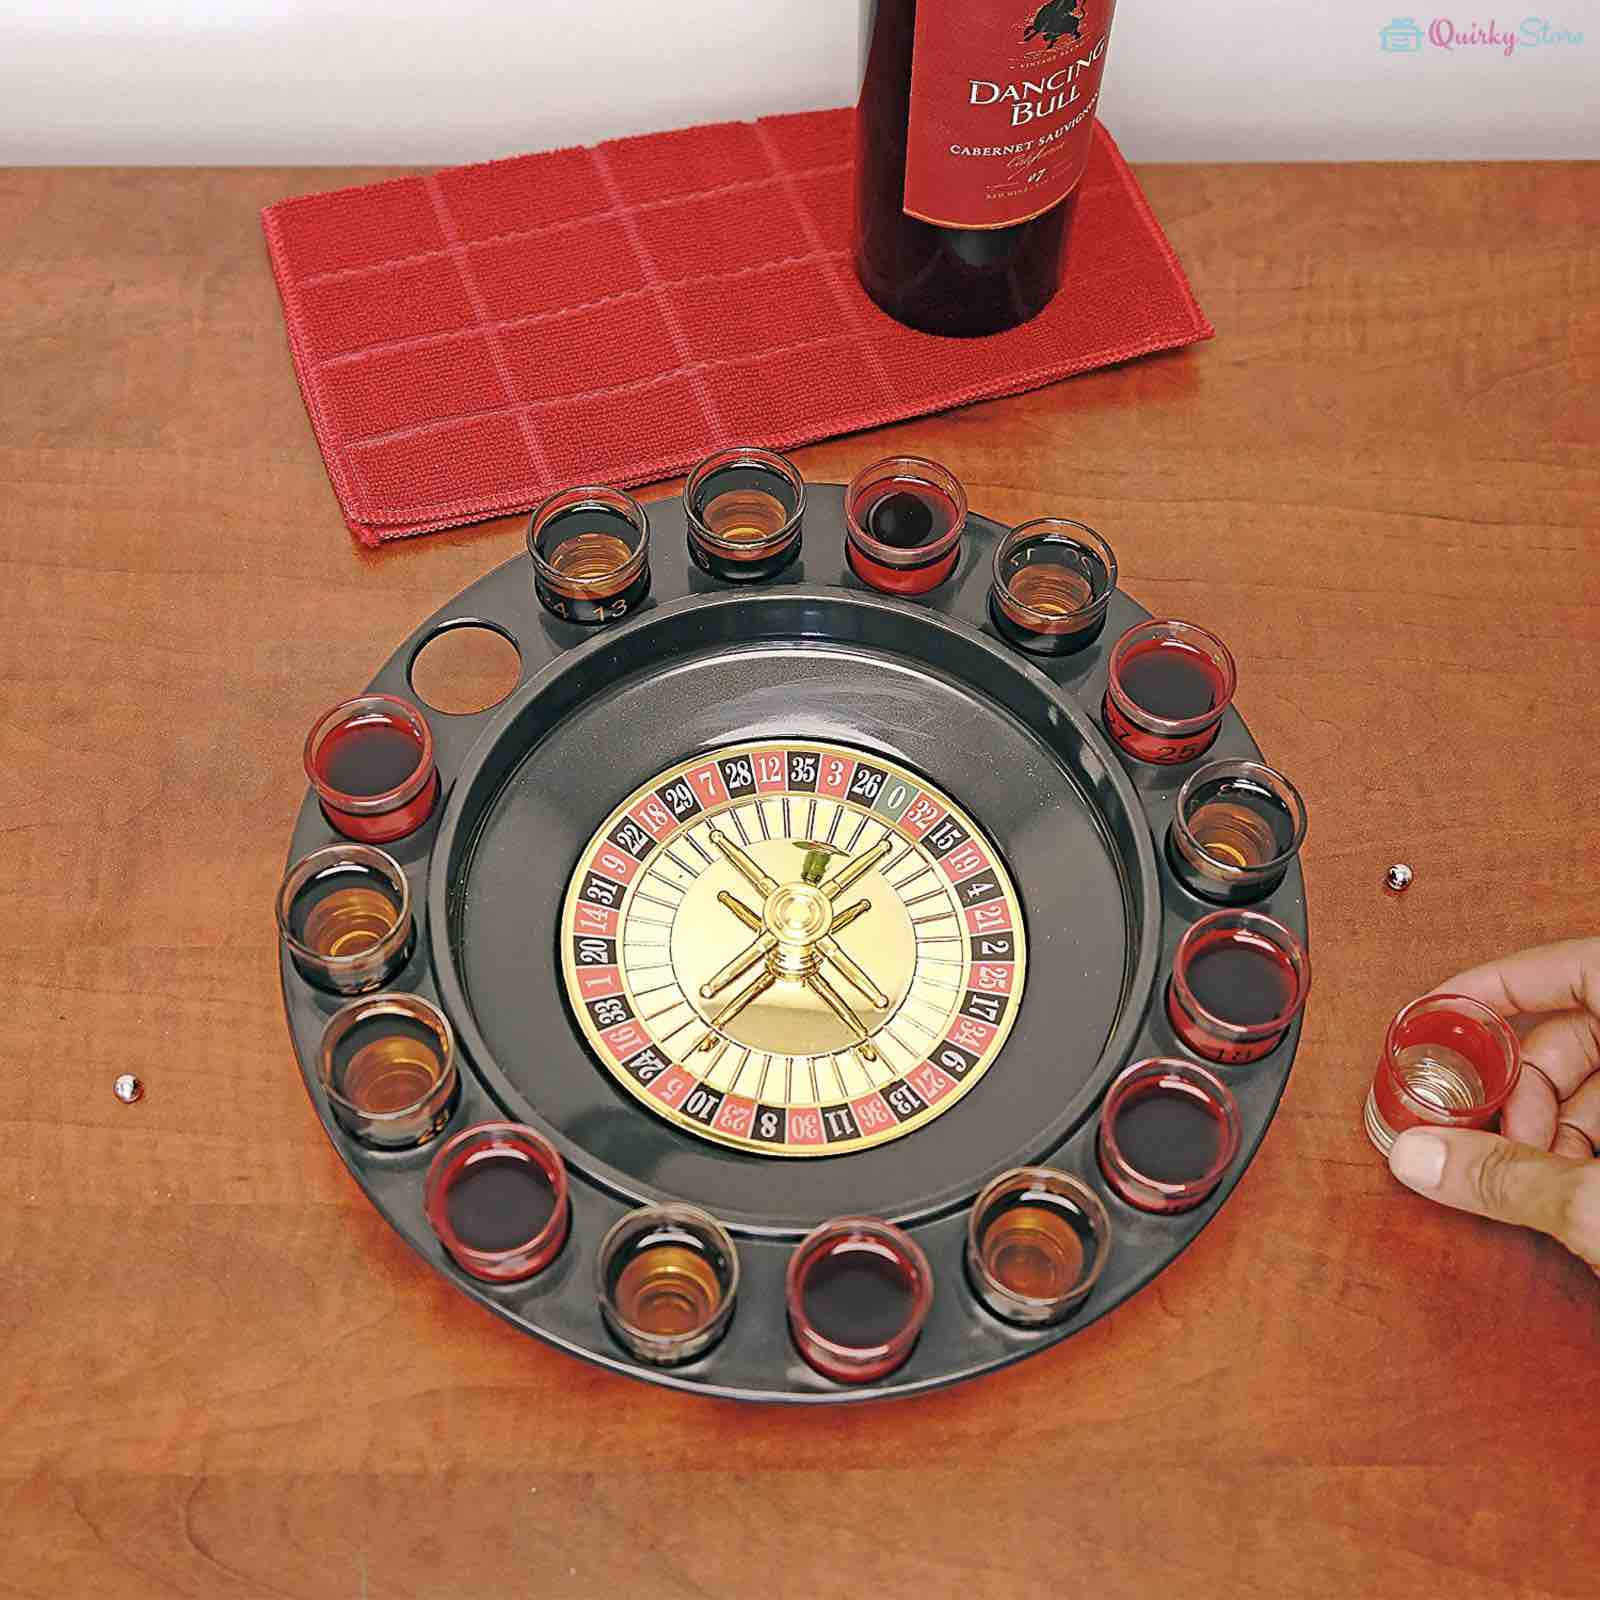 Drinking Roulette Set ( 16 Shot Glasses ) - QuirkyStore.in